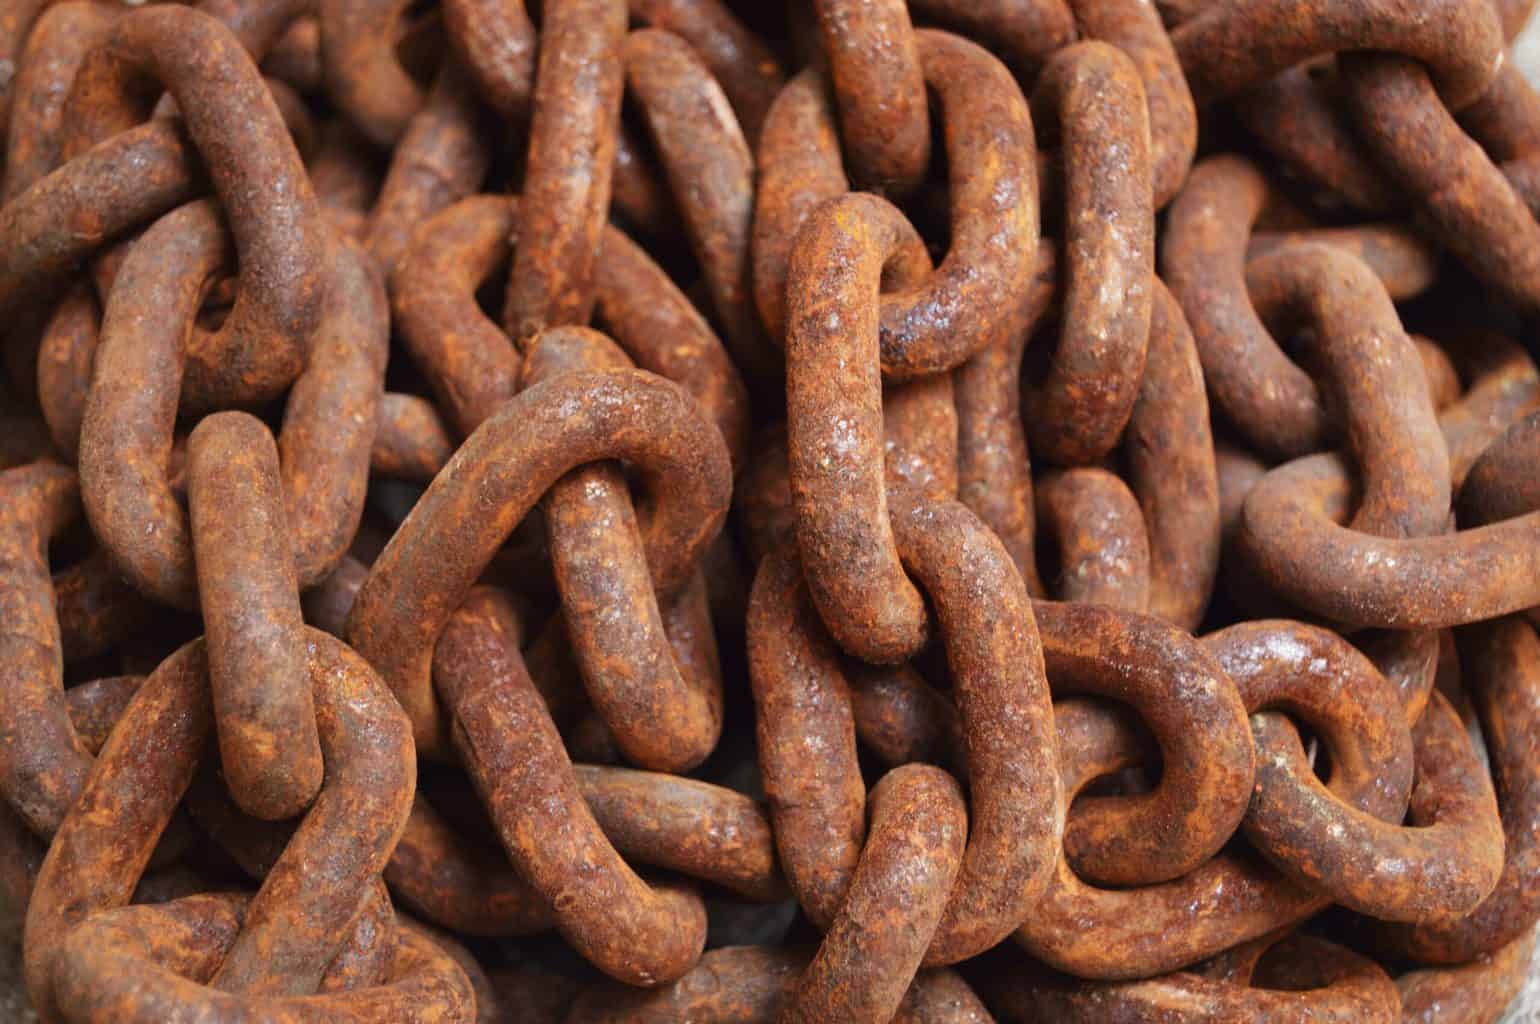 Rusty chains stacked together